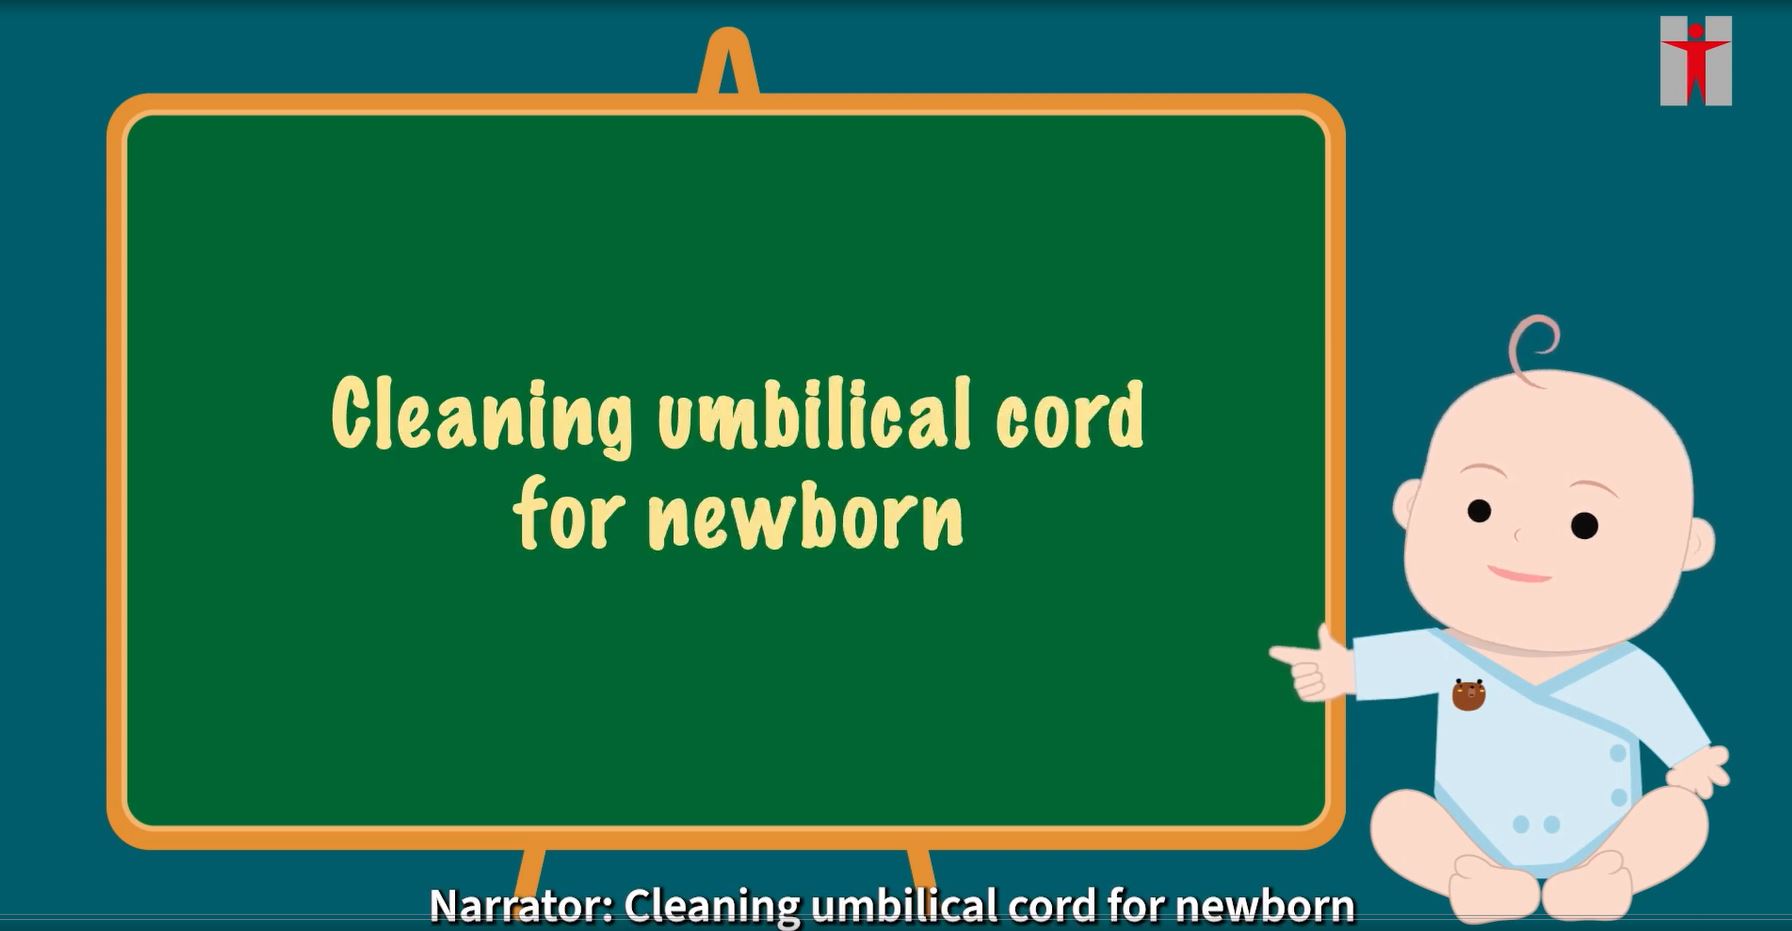 Cleaning umbilical cord for newborn